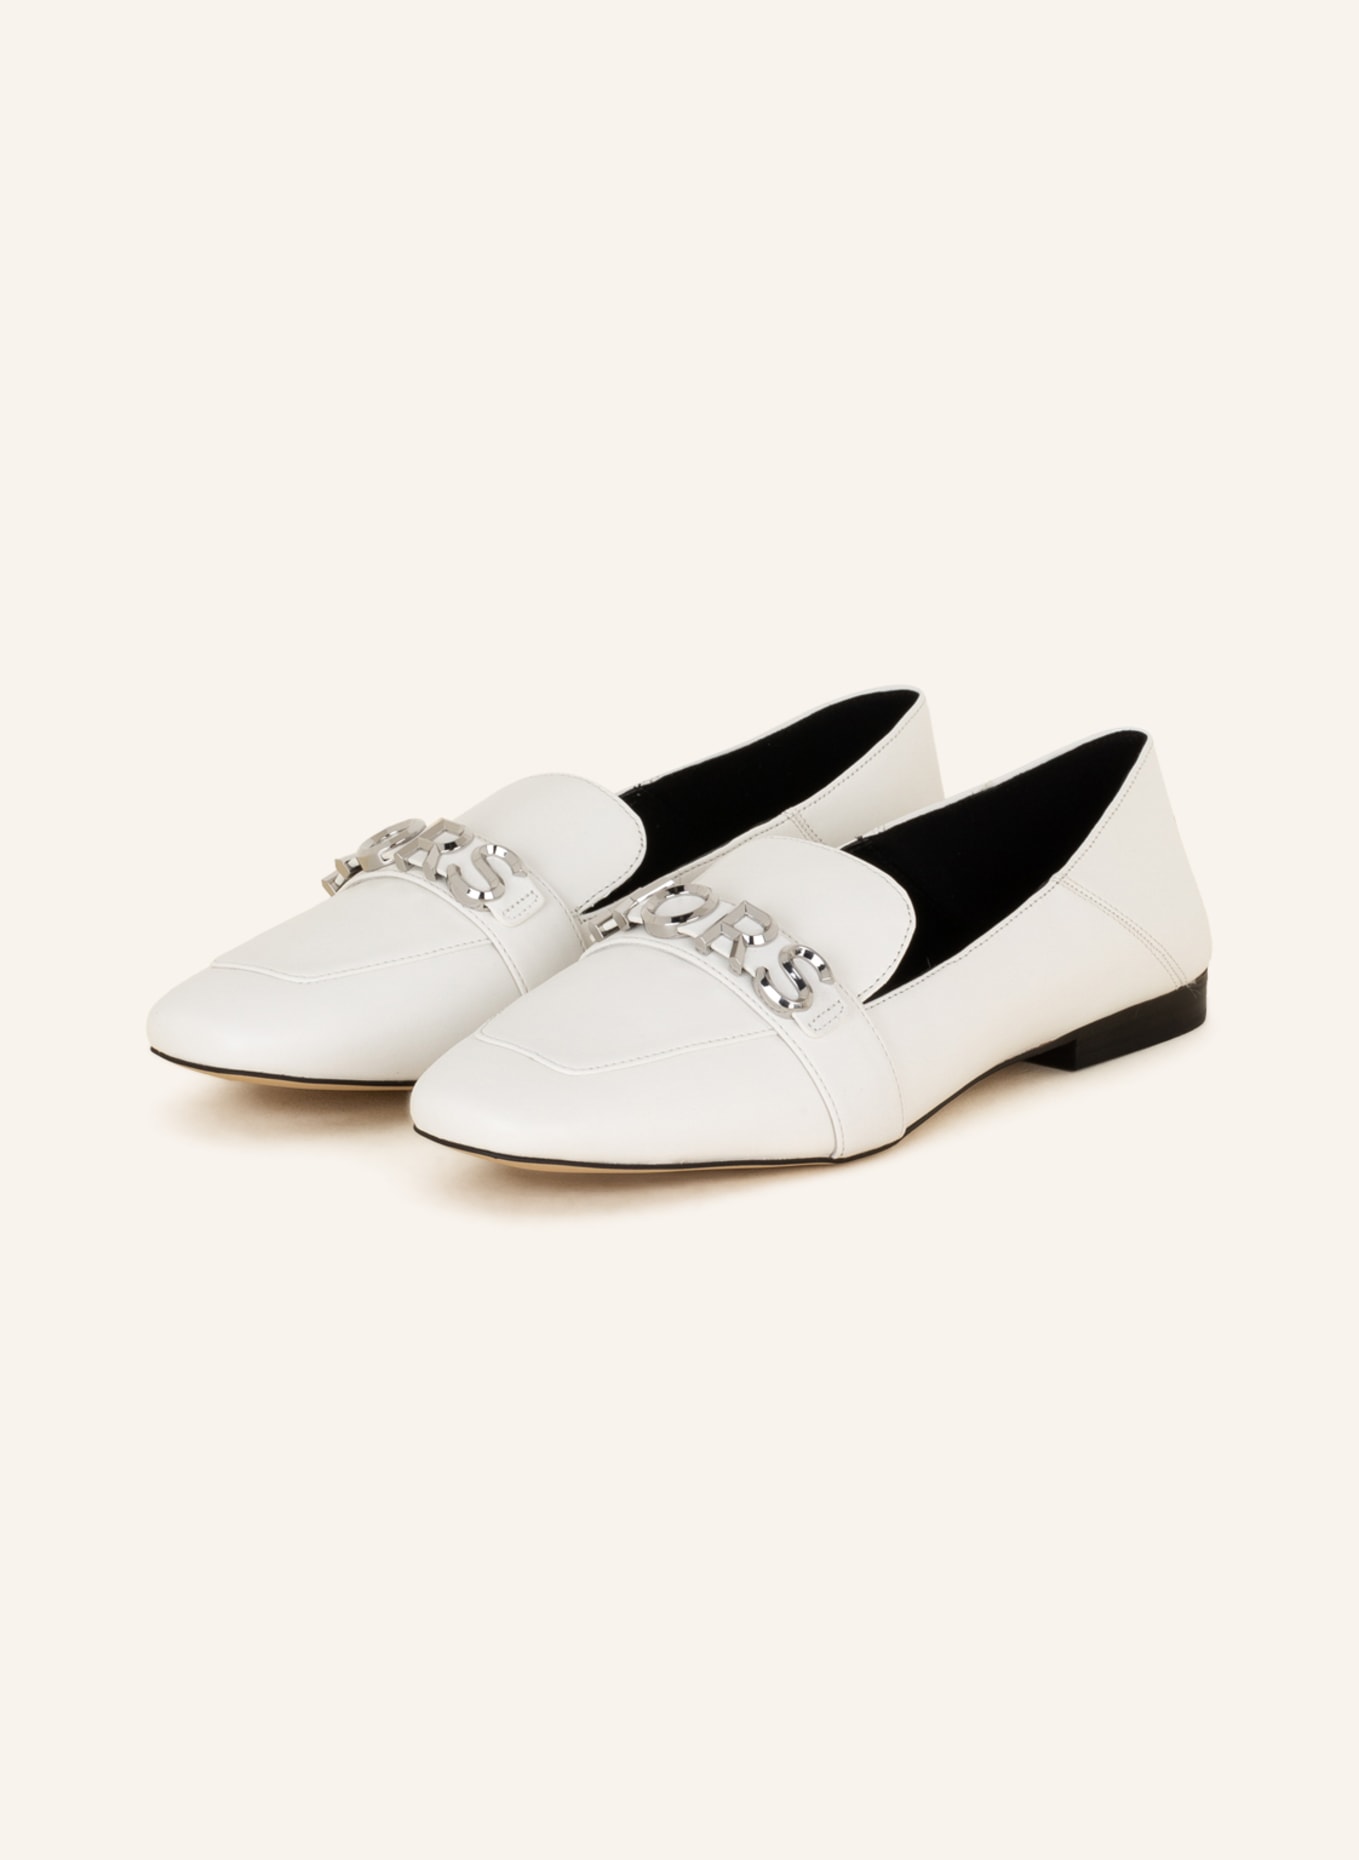 MICHAEL KORS Loafer MADELYN , Farbe: WEISS (Bild 1)